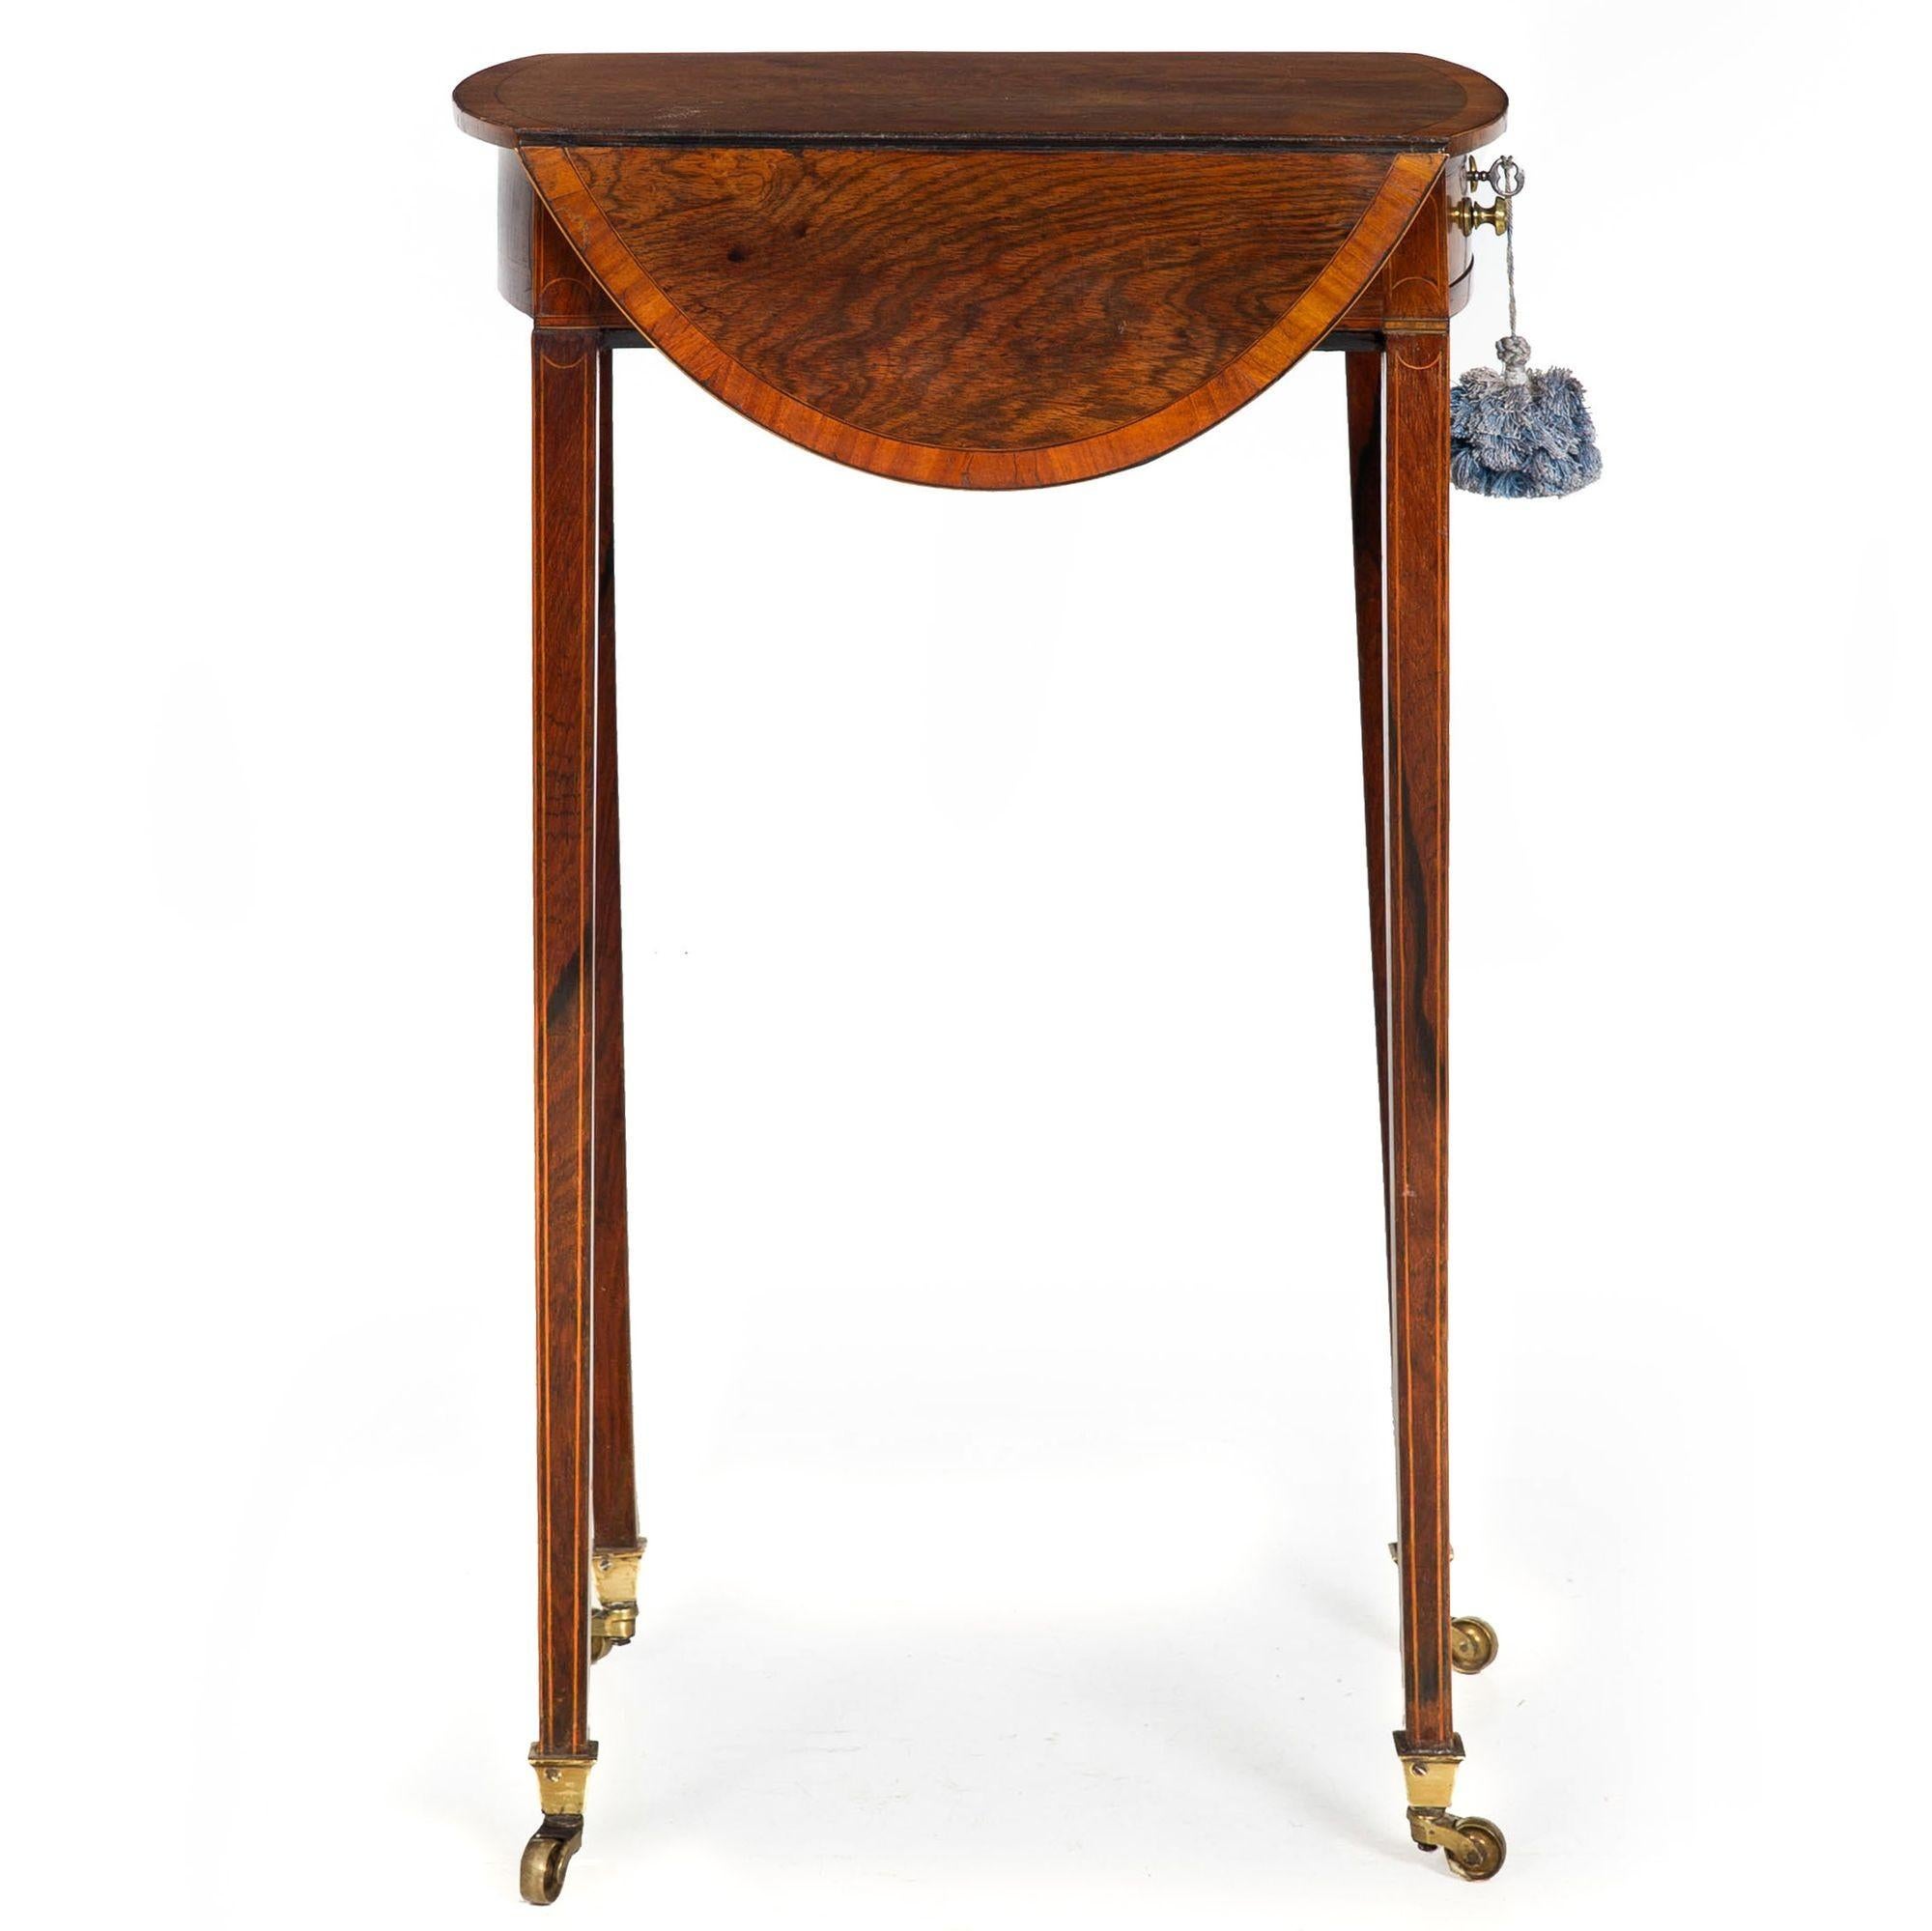 Rare Small English George III Rosewood Ovular Pembroke Side Table circa 1795 In Good Condition For Sale In Shippensburg, PA